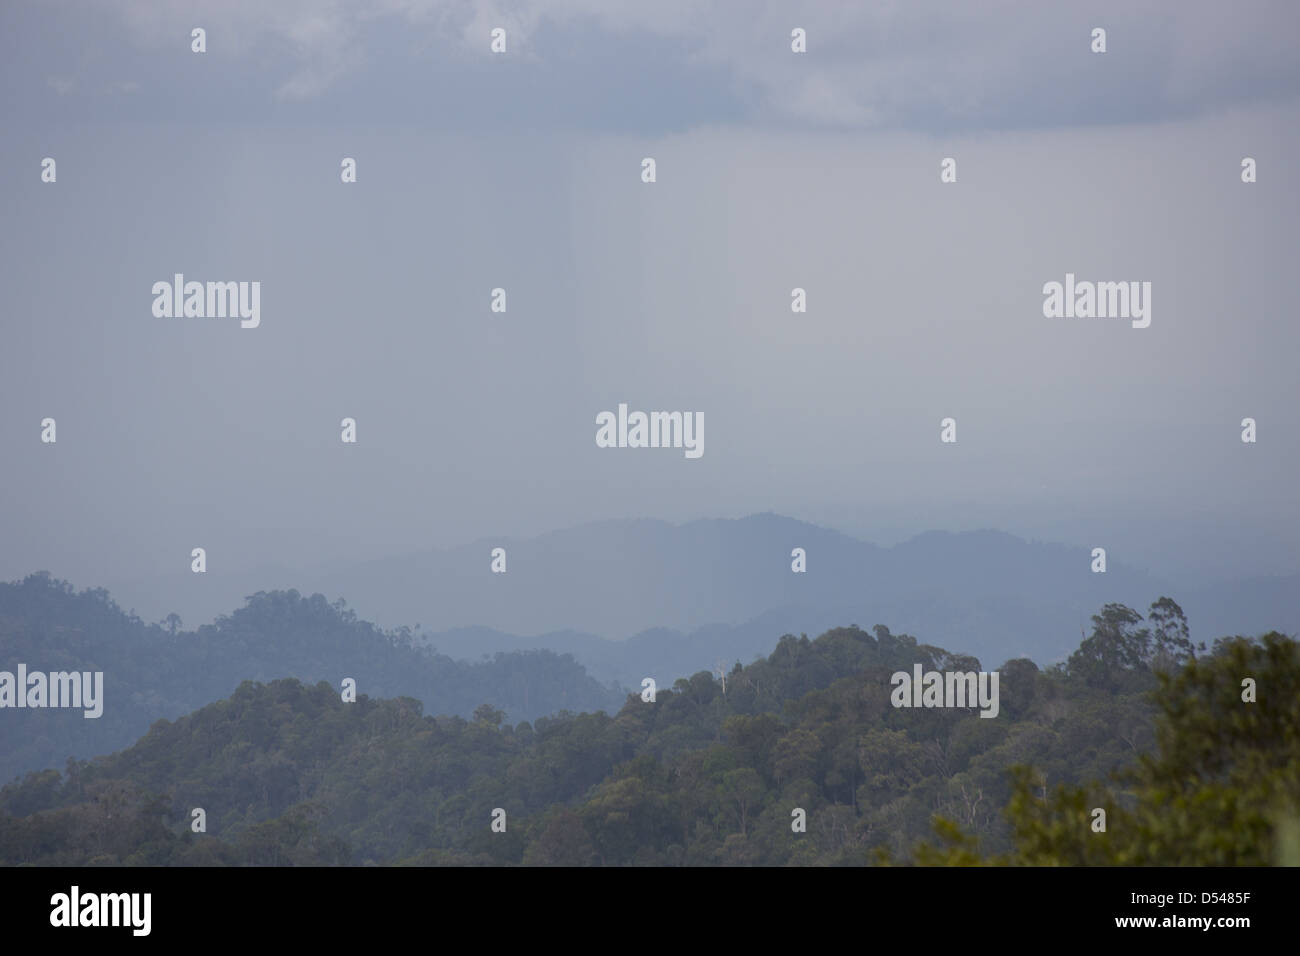 Dark clouds with falling rain over the forested hills of Pahang province, Malaysia Stock Photo